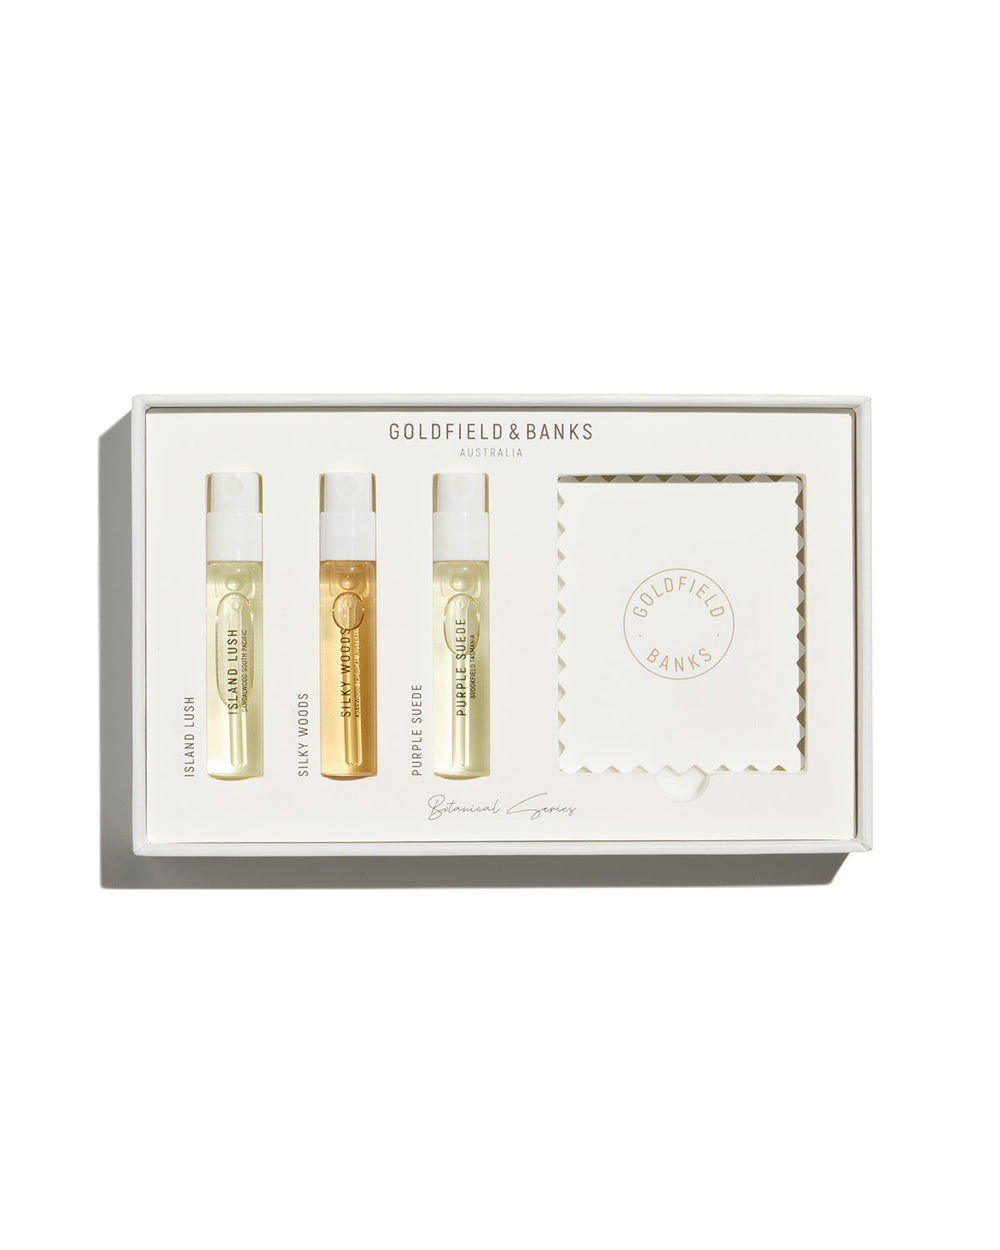 Goldfield & Banks Luxury Sample Collection Botanical Series